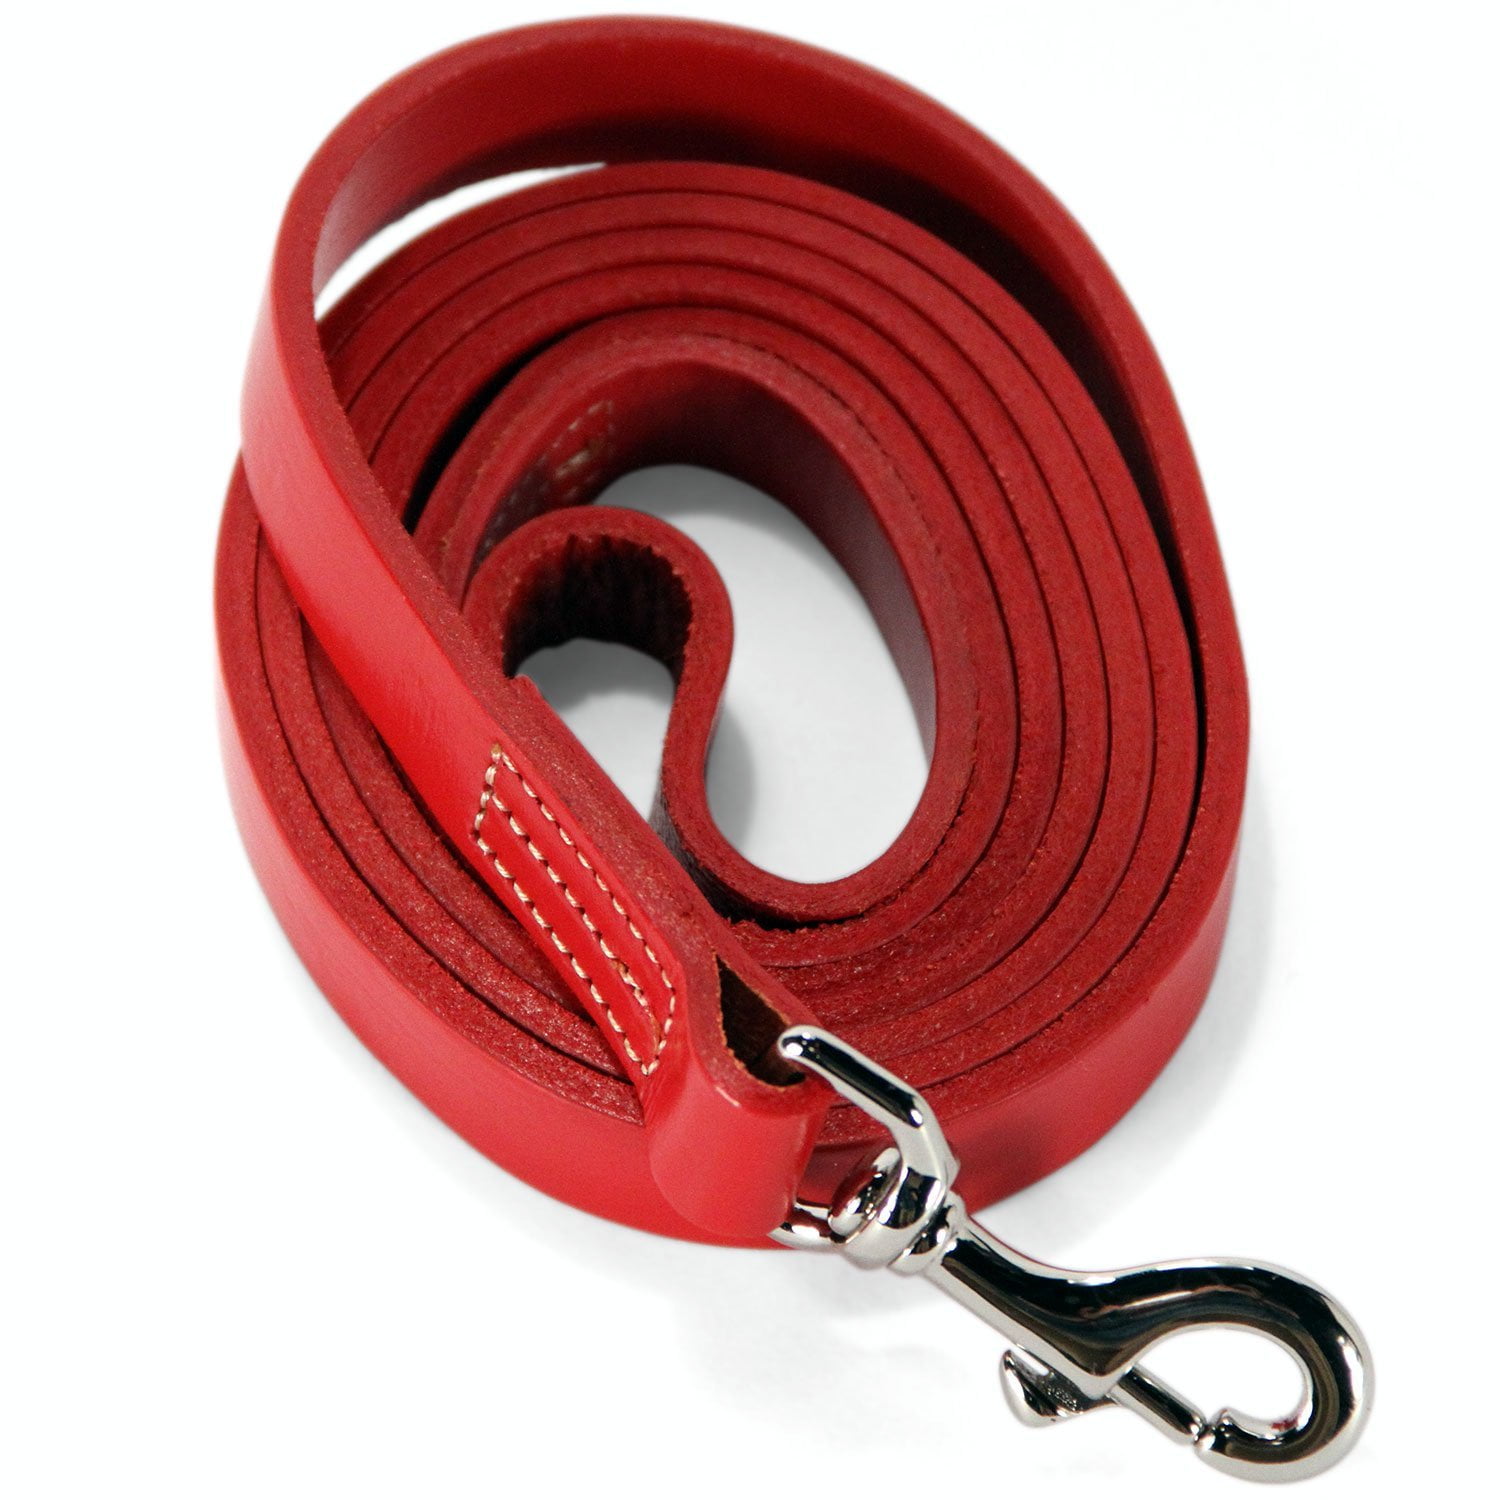 Logical Leather Dog Leash Best for Training Water Resistant Heavy Full Grain Leather Lead